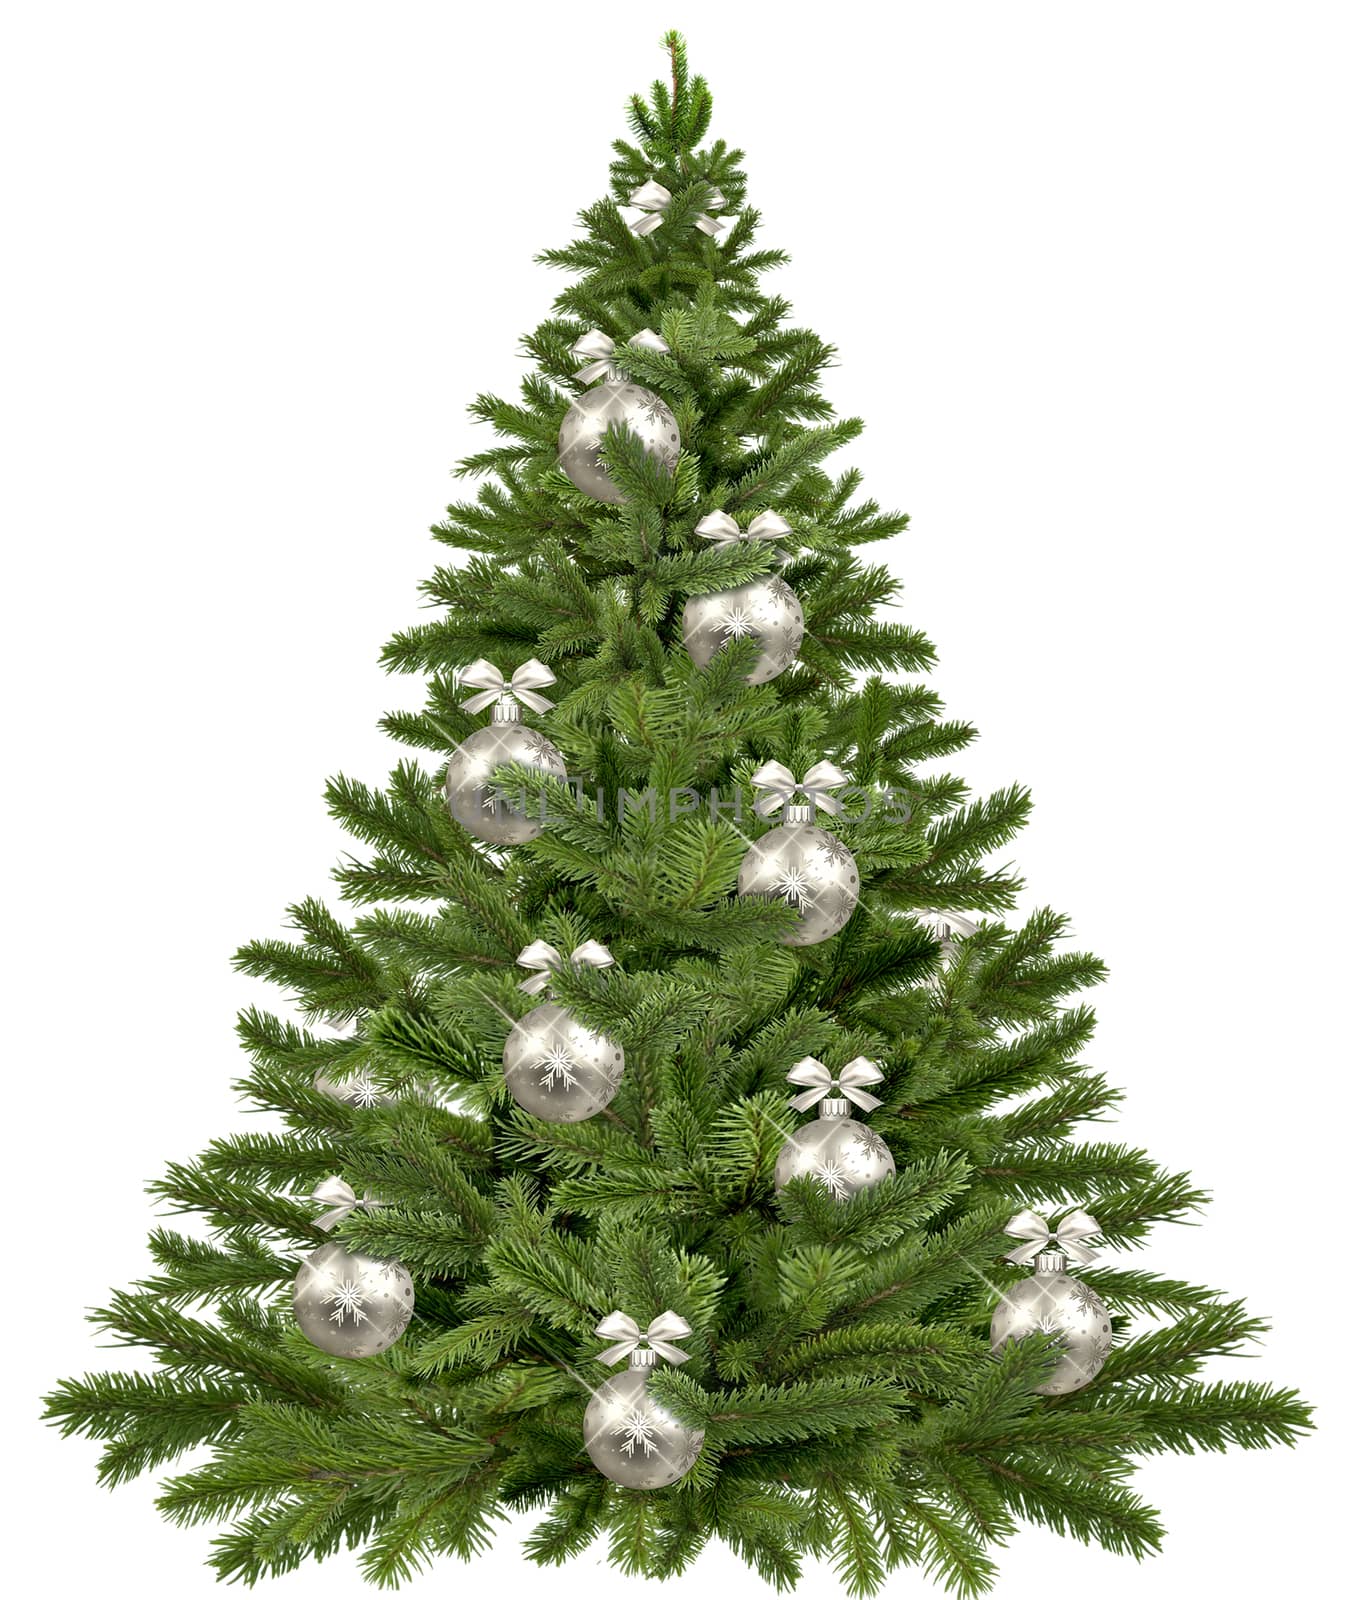 Beautiful Christmas tree with snow on branches on white background. 3D rendering.